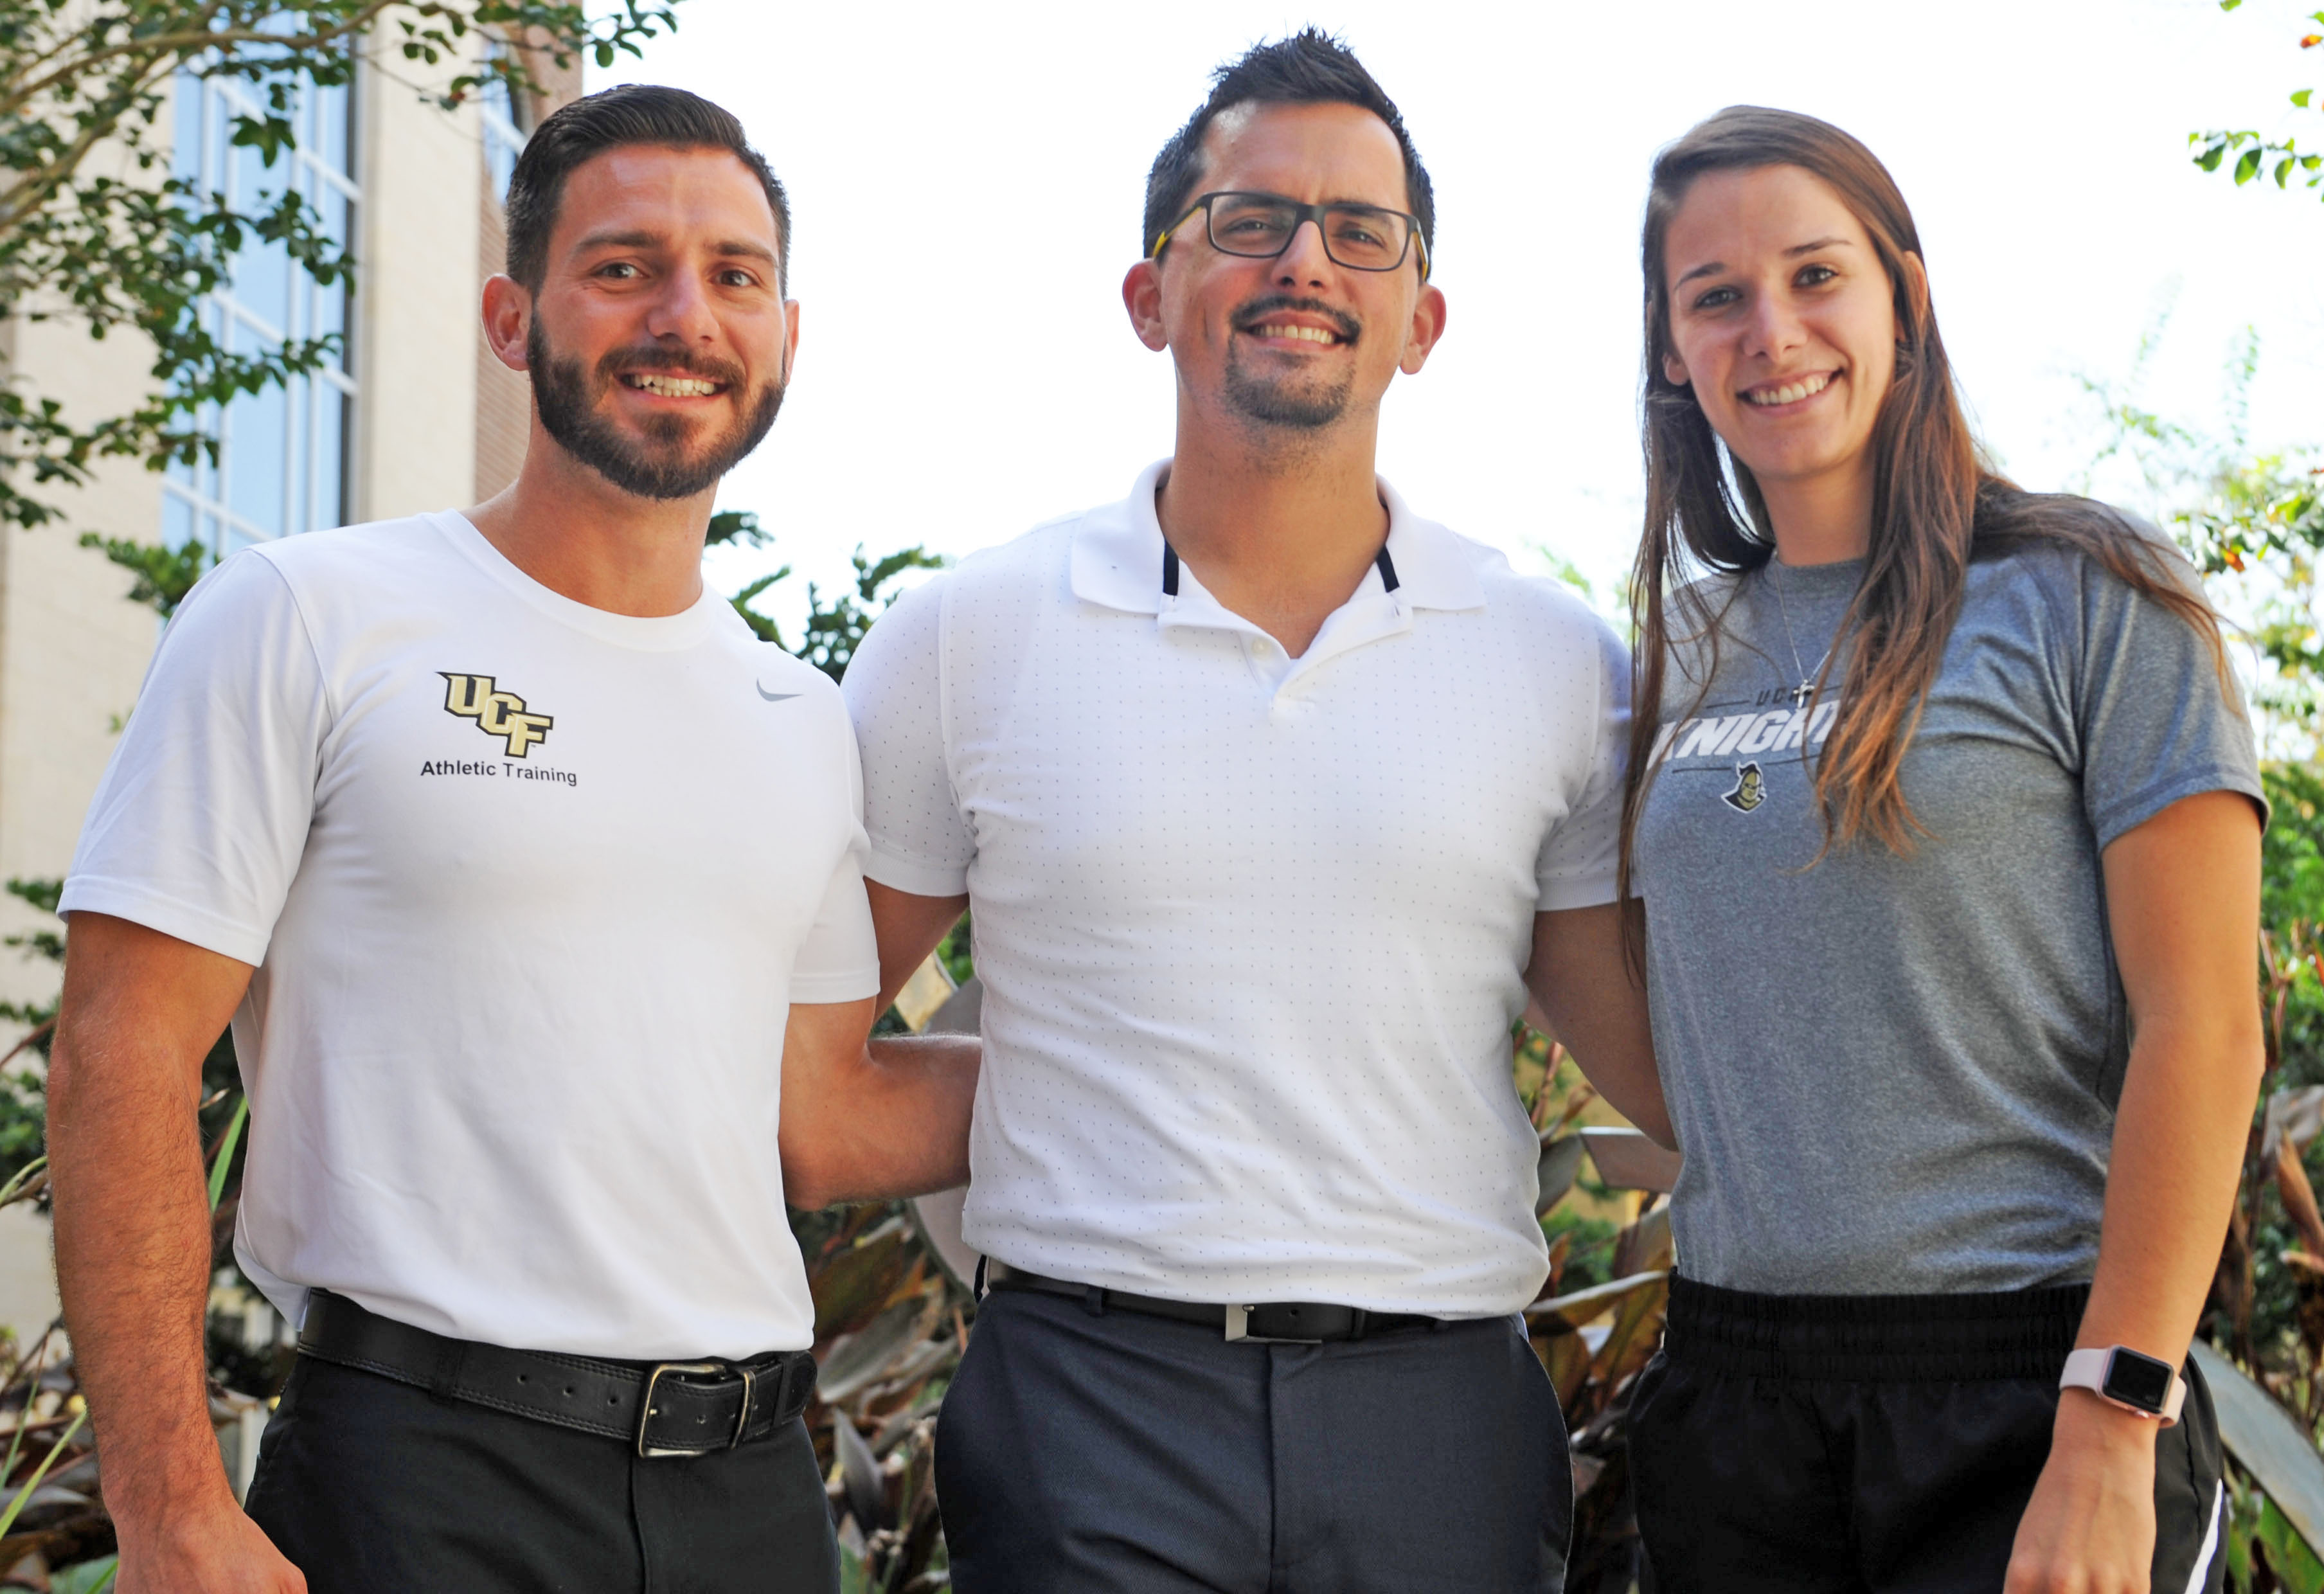 Carlos Gual stands with Blake DeSenti, left, and Alaina Locus, right, two athletic training students who participated in the interprofessional event